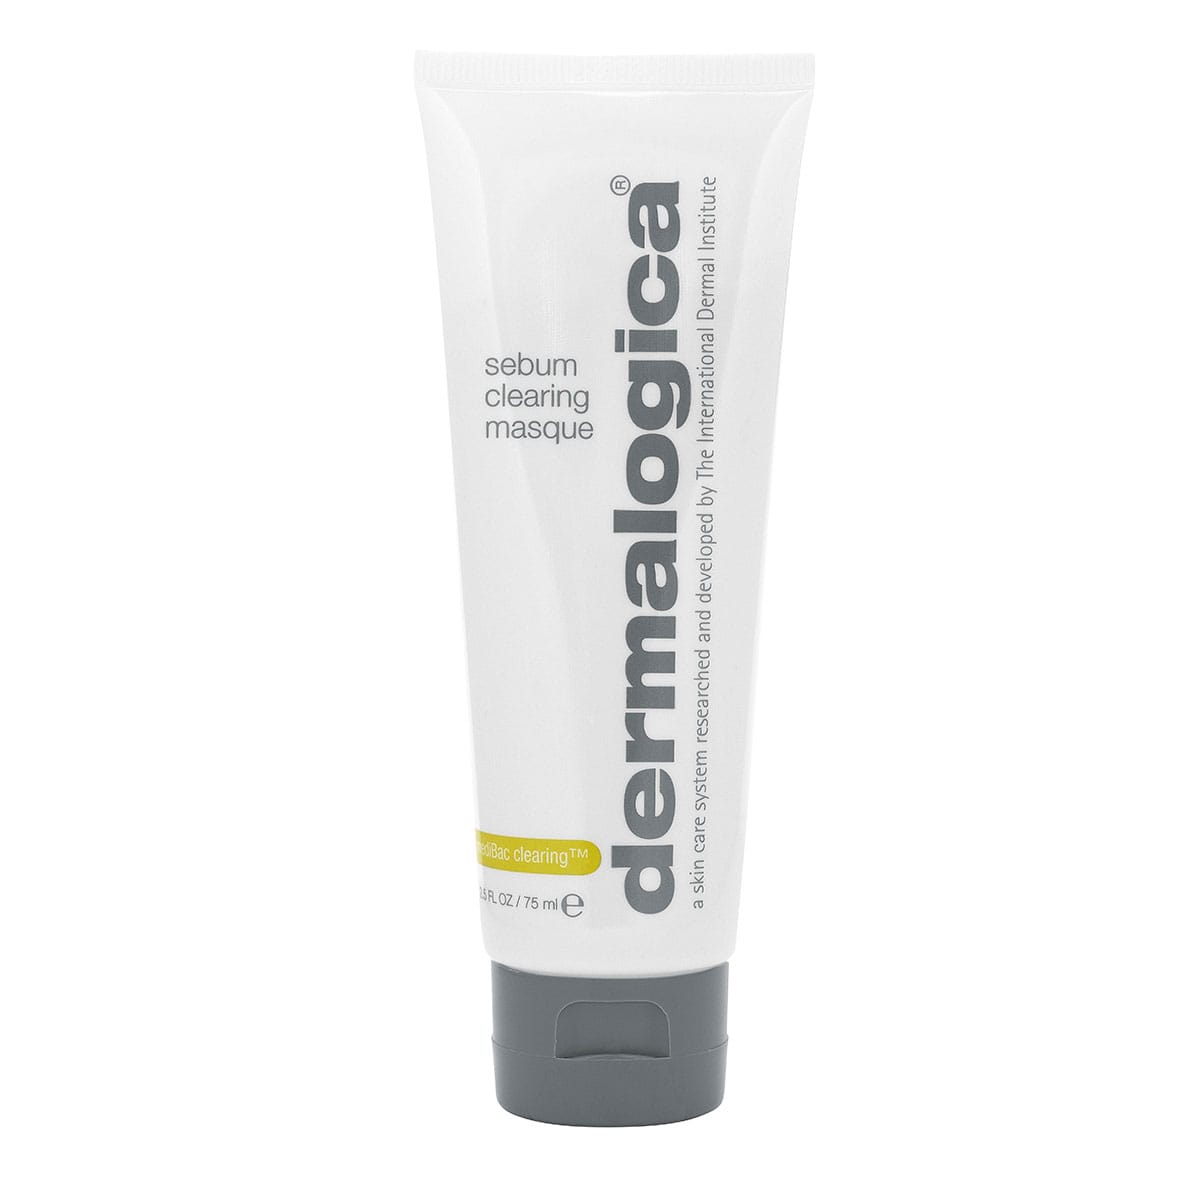 Se Dermalogica Sebum Clearing Masque 75 ml. - Active Clearing hos Staybeautiful